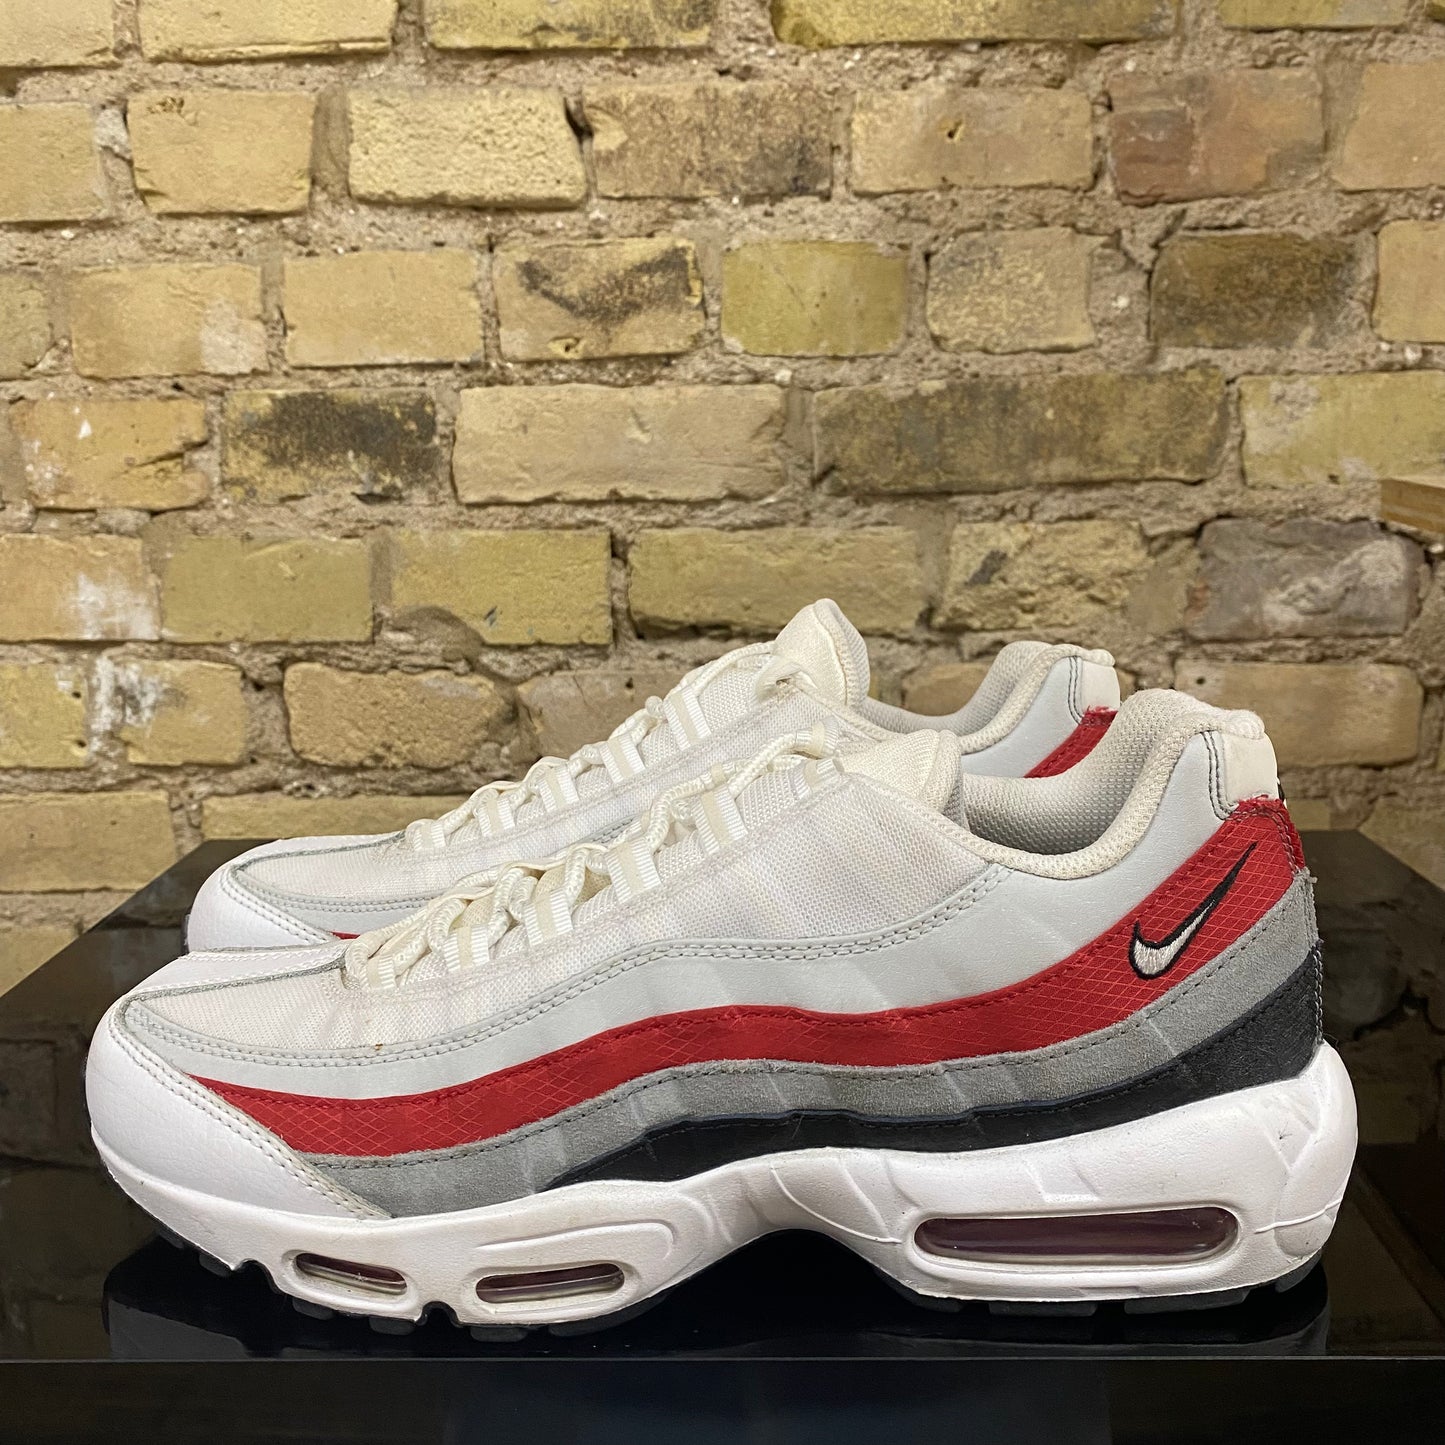 Airmax 95 red gray size 10 TRUSTED CLUB (MKE)